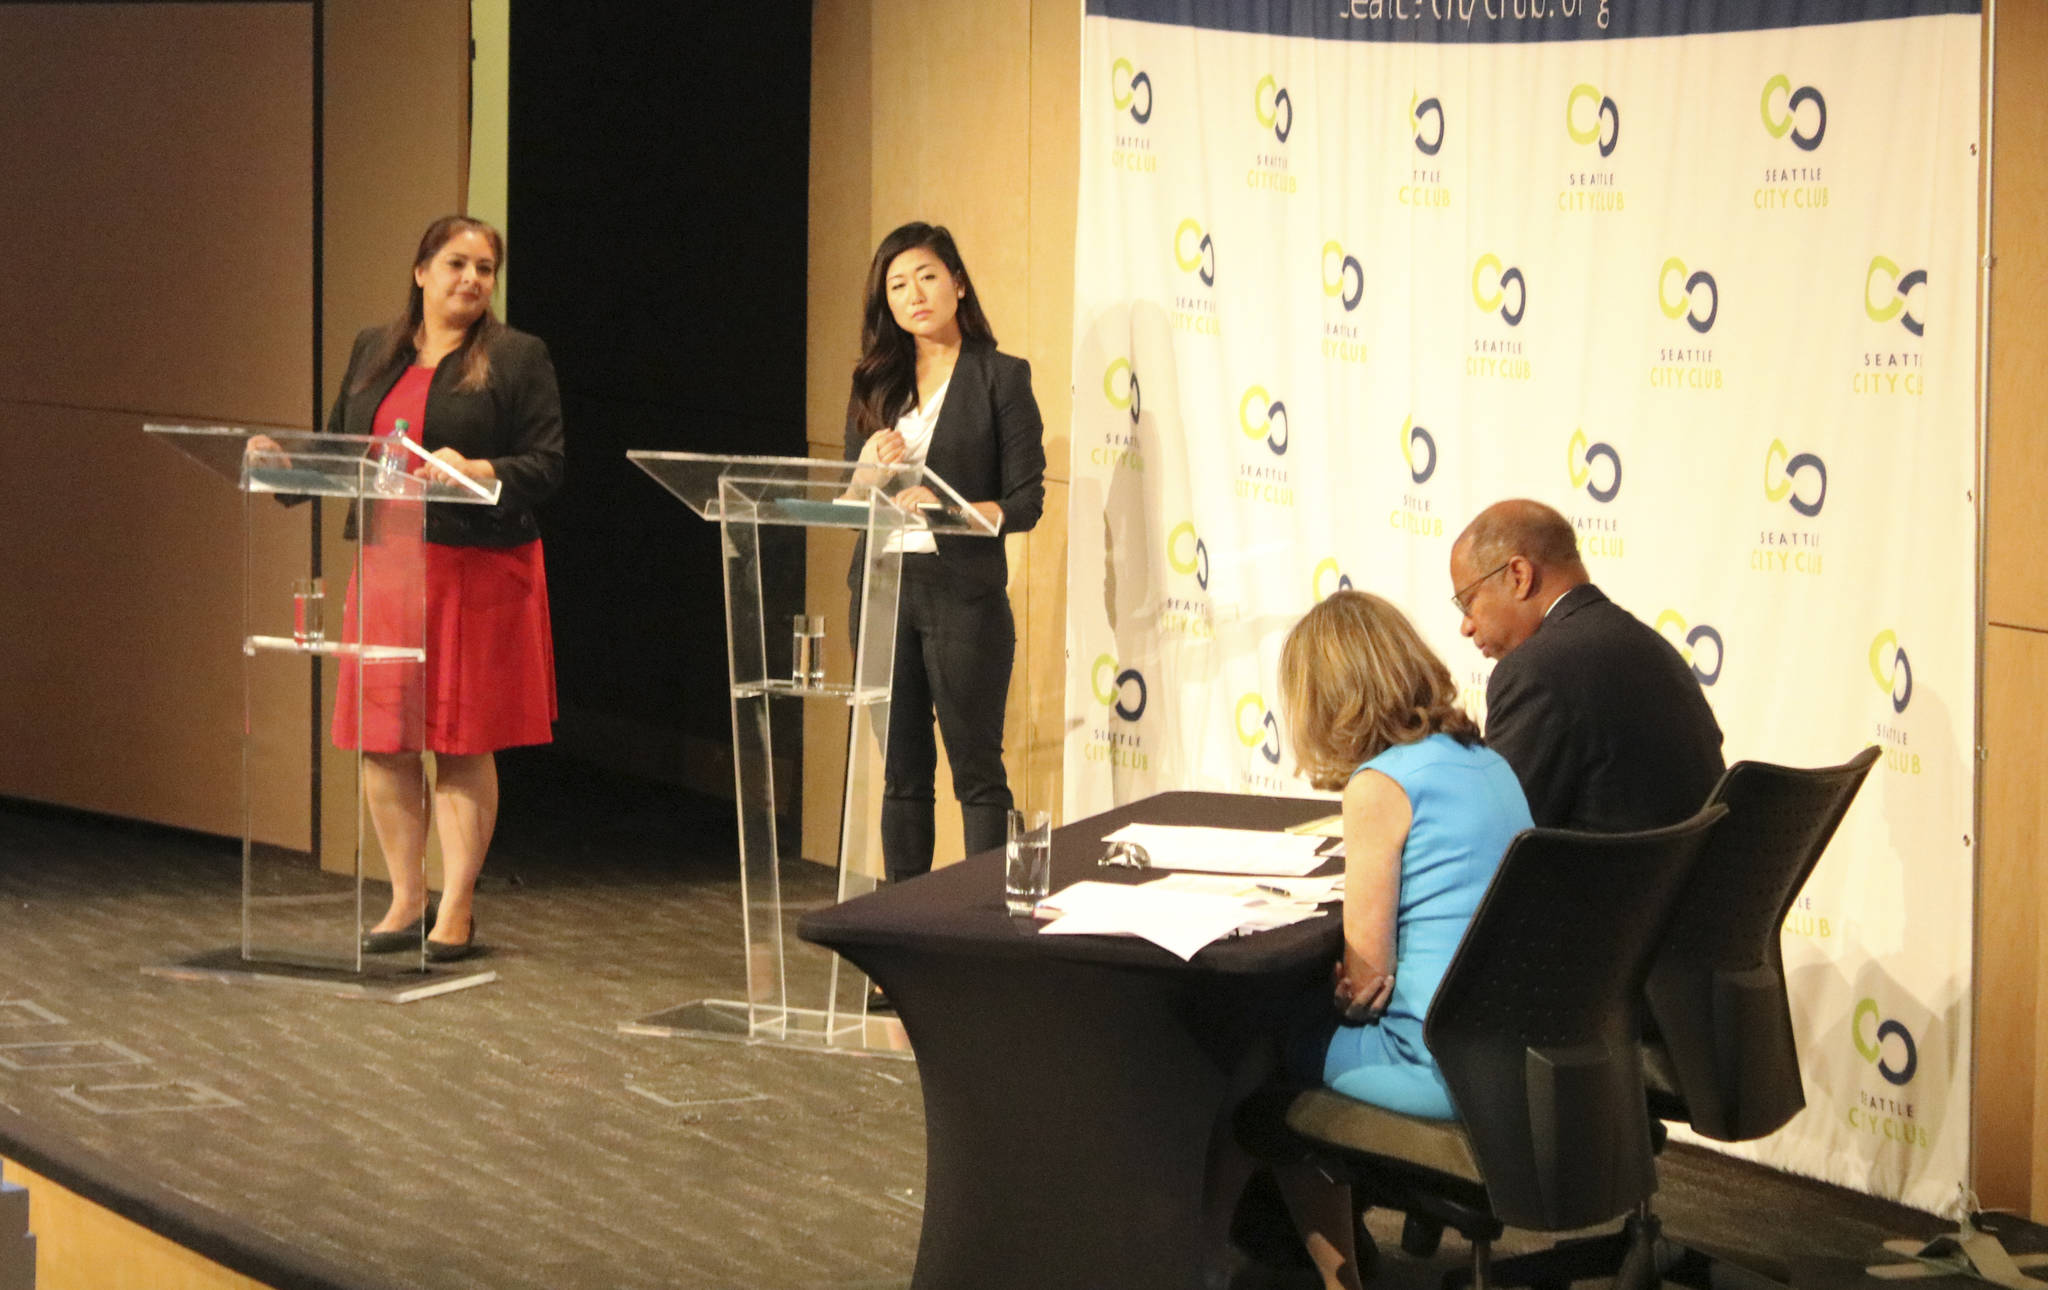 Manka Dhingra, left, and Jinyoung Lee Englund, center left, squar off at a debate on the Microsoft campus on Tuesday. At right are KIRO 7 moderators. Aaron Kunkler/Redmond Reporter